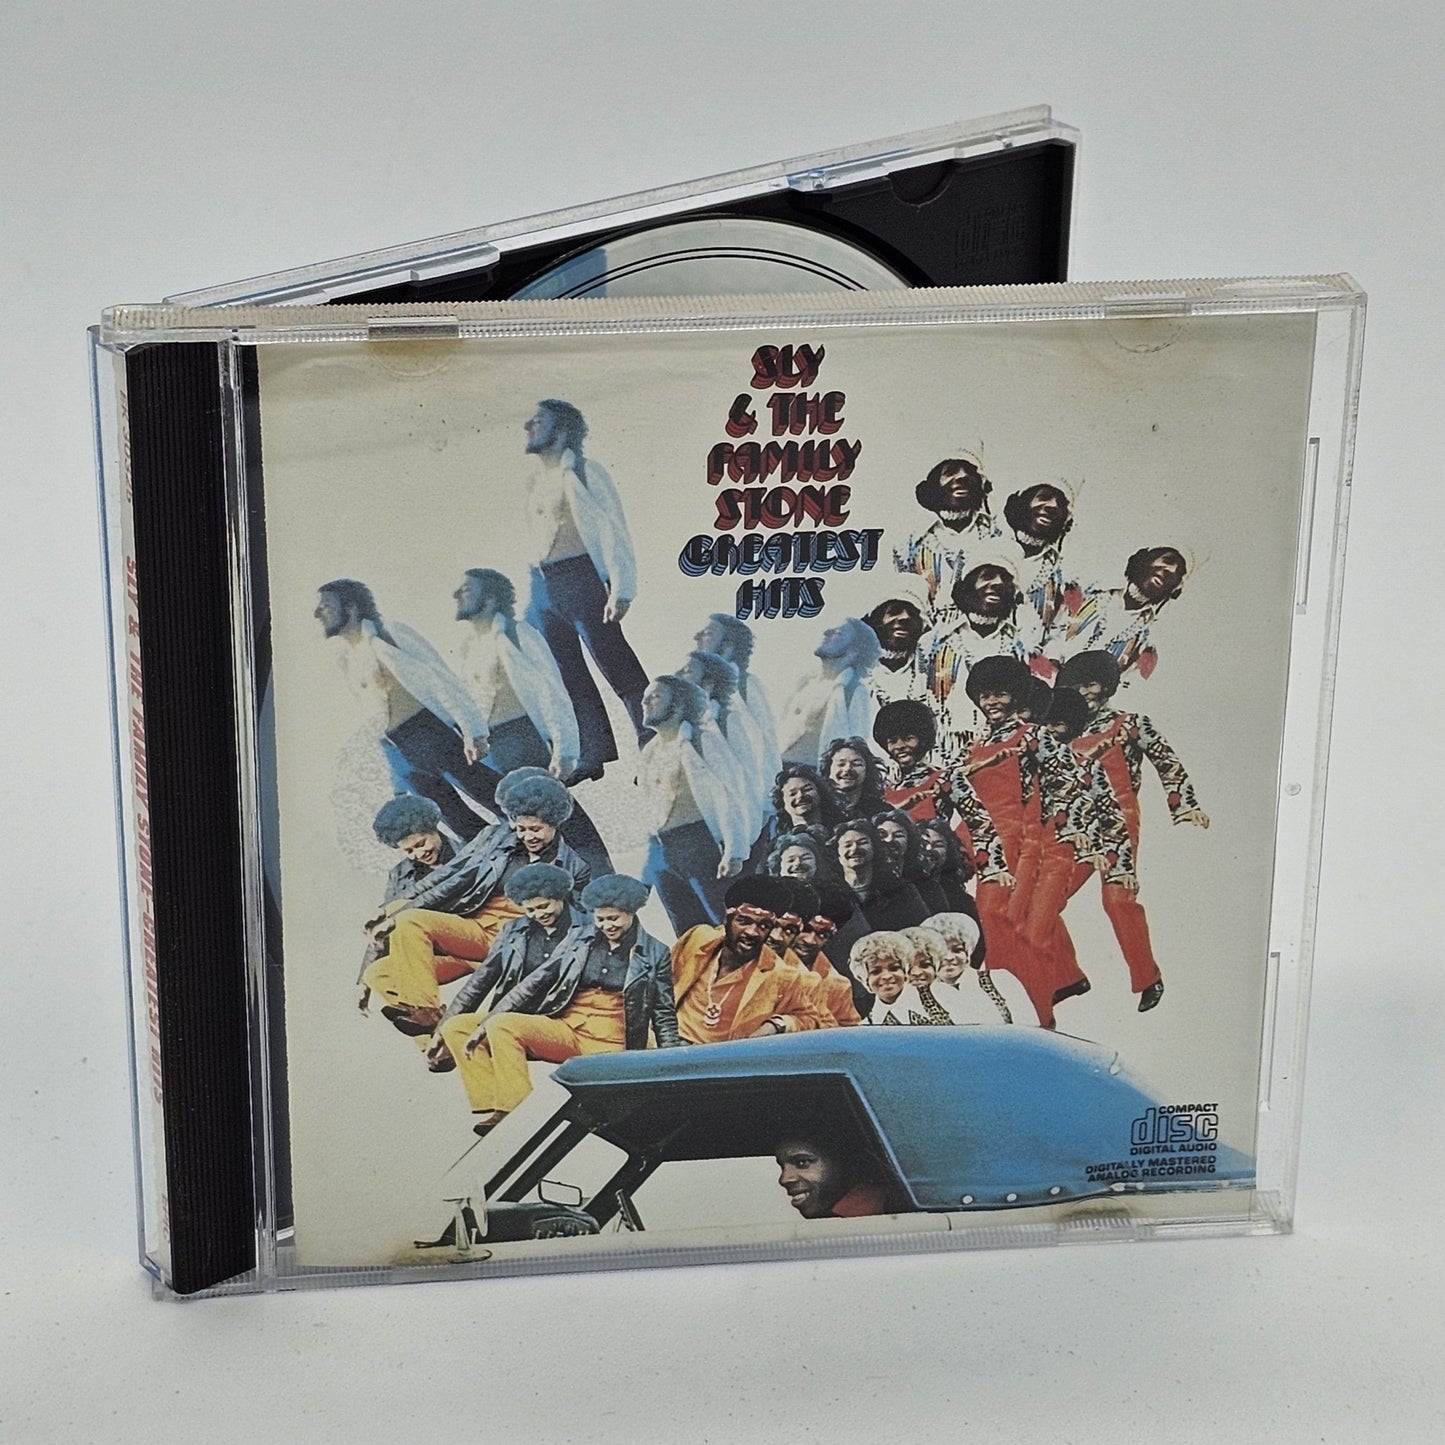 Epic Records - Sly & The Family Stone | Greatest Hits | CD - Compact Disc - Steady Bunny Shop